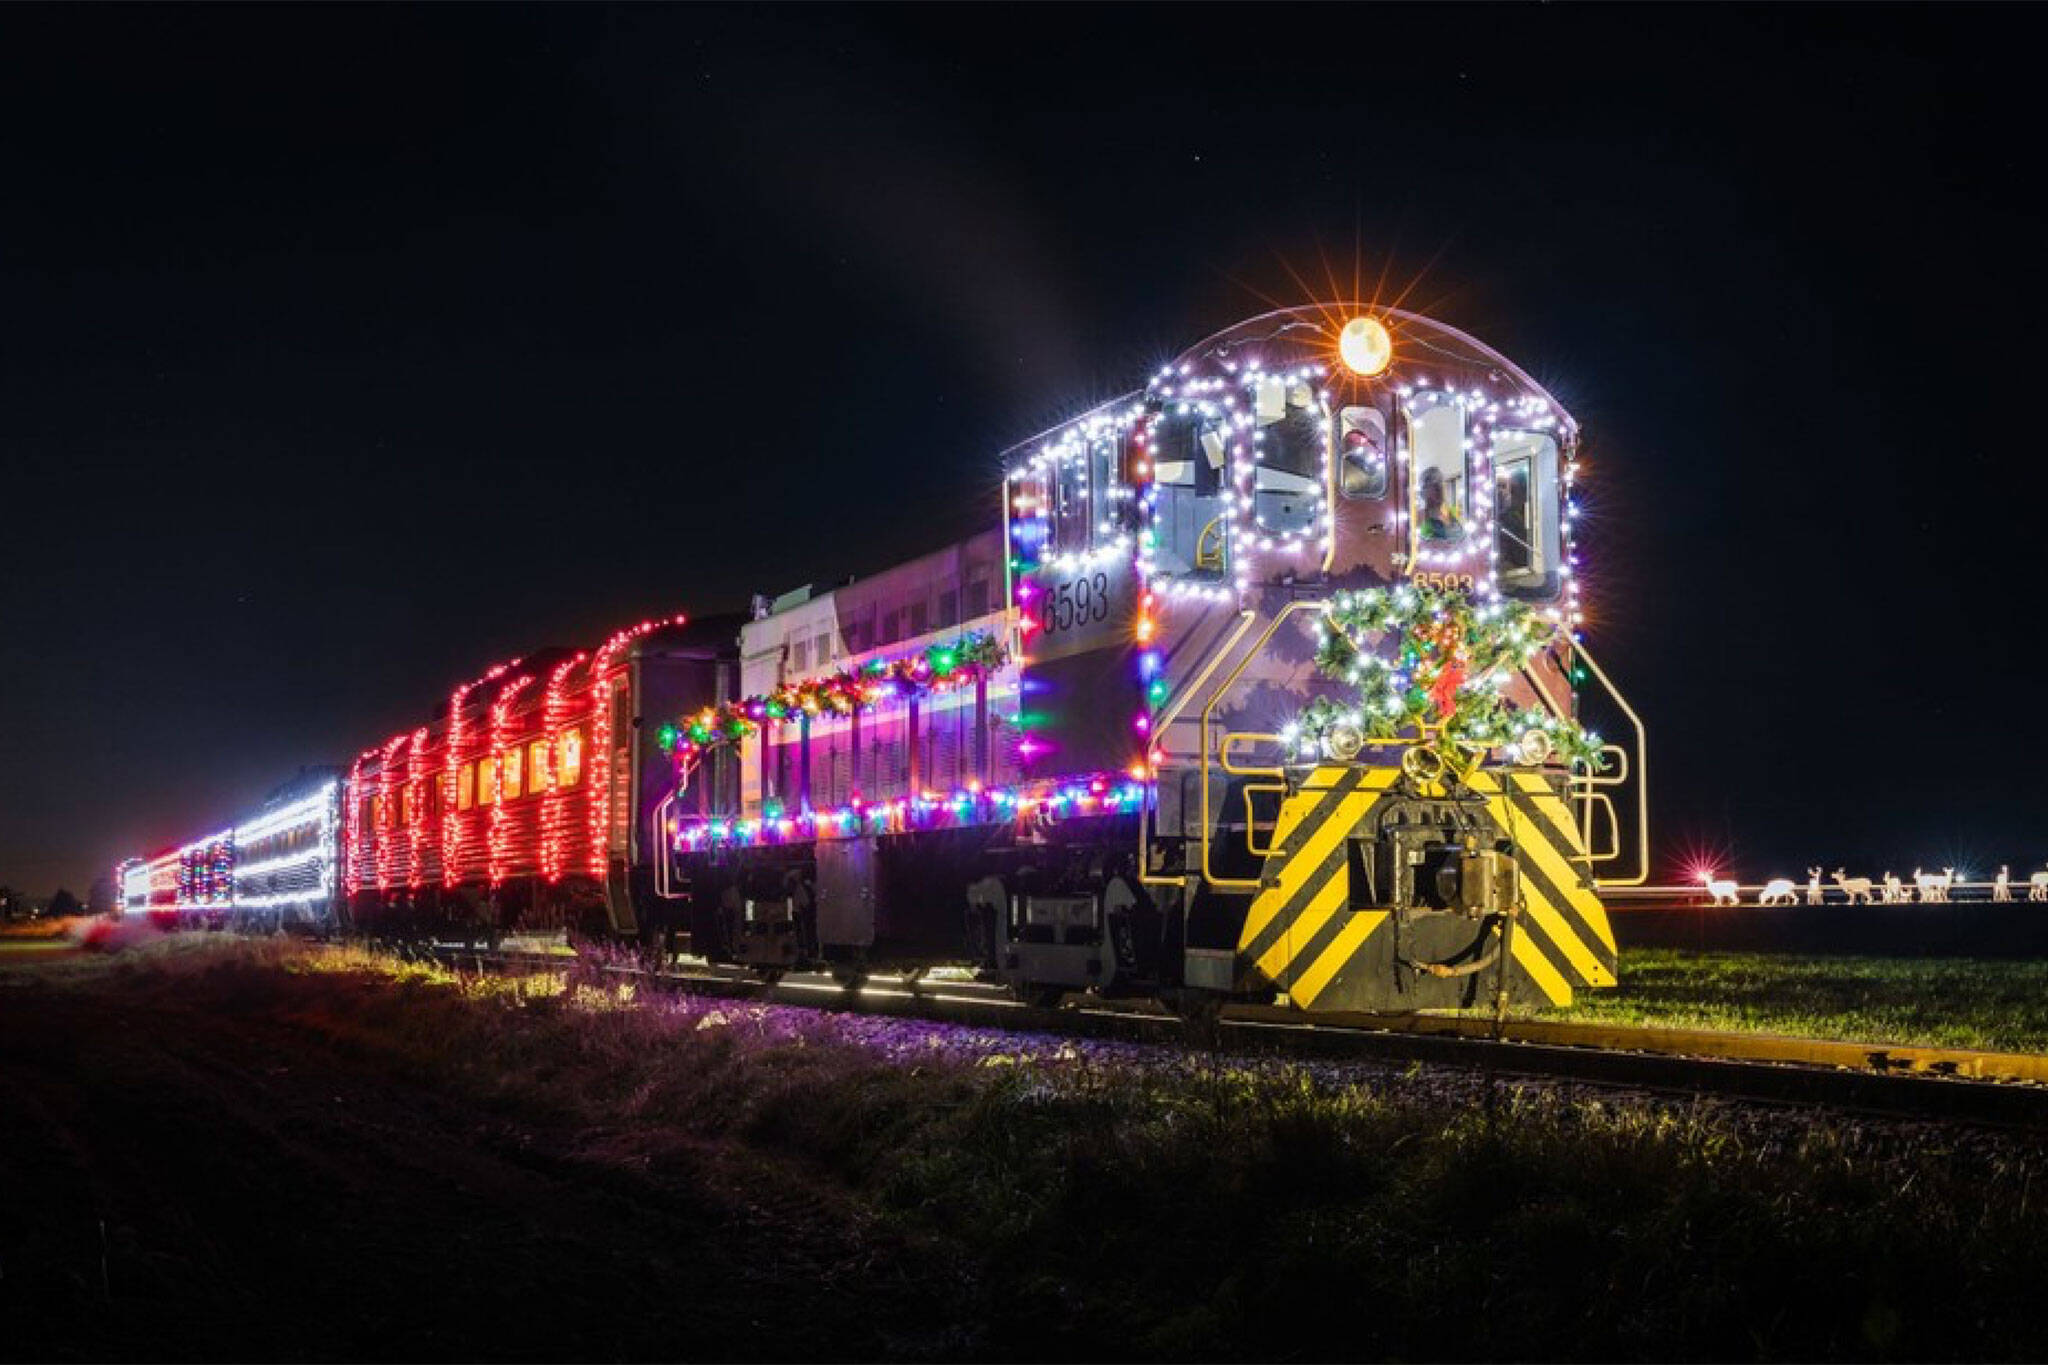 You can ride on a magical Christmas train in Ontario